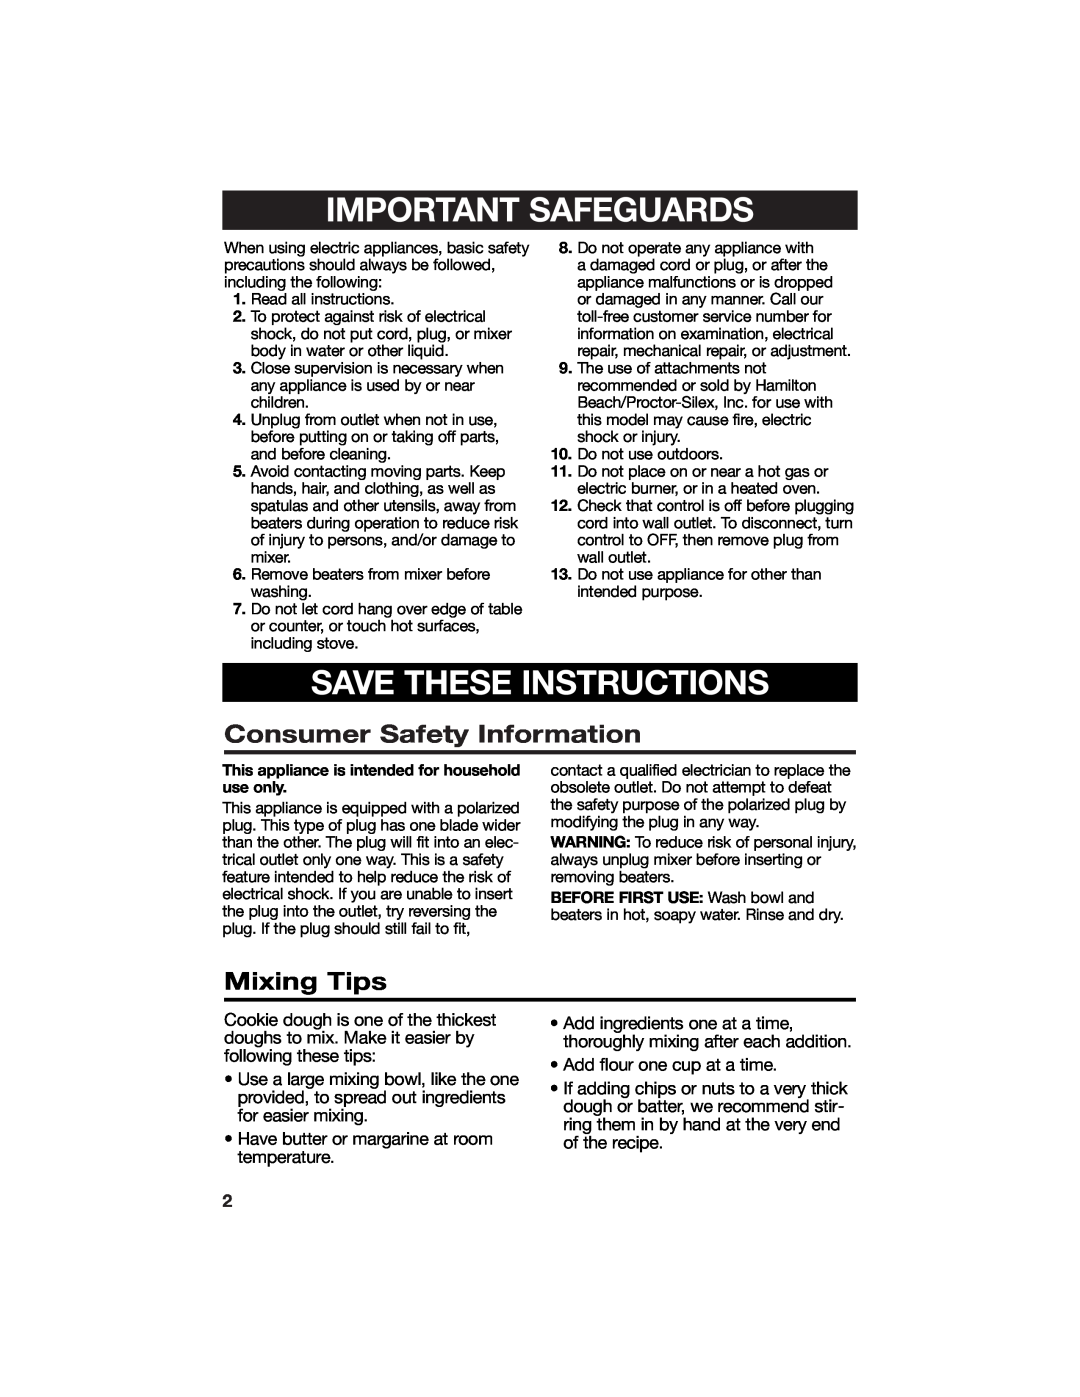 Hamilton Beach 840086200 manual Consumer Safety Information, Mixing Tips, Important Safeguards, Save These Instructions 